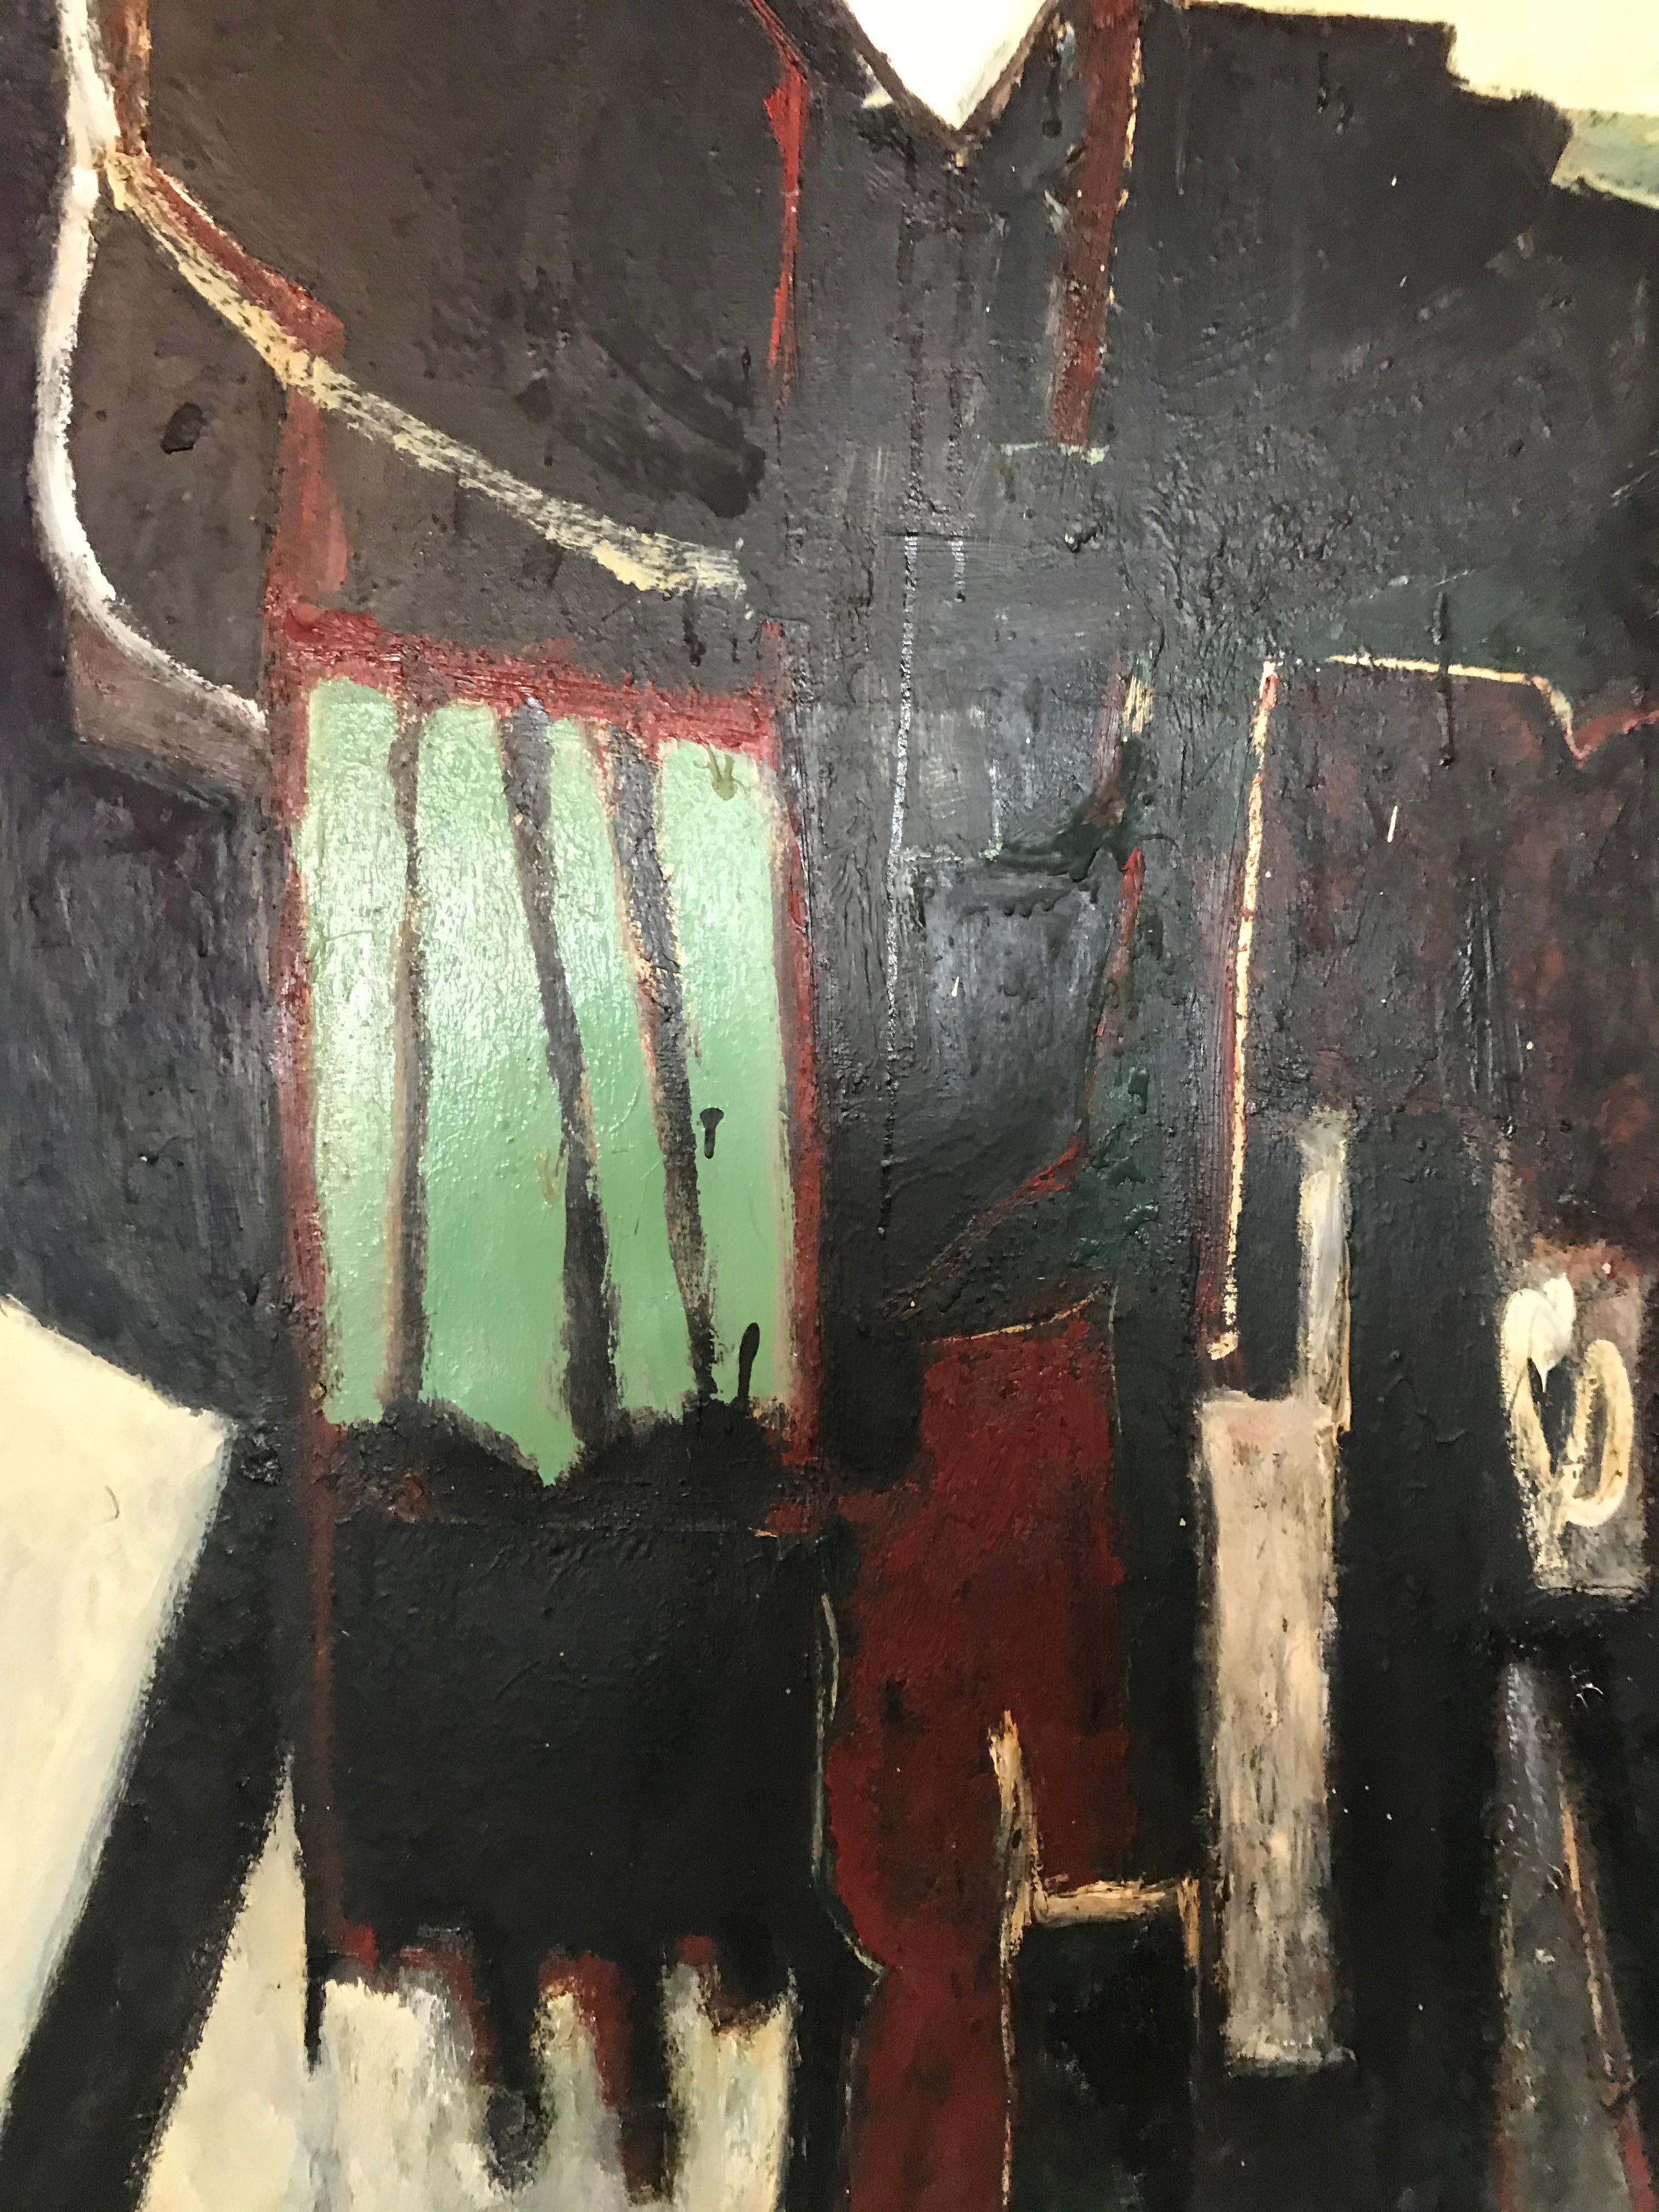 American Large Scale Abstract Expressionist Painting New York Artist Jack Hammack, 1964